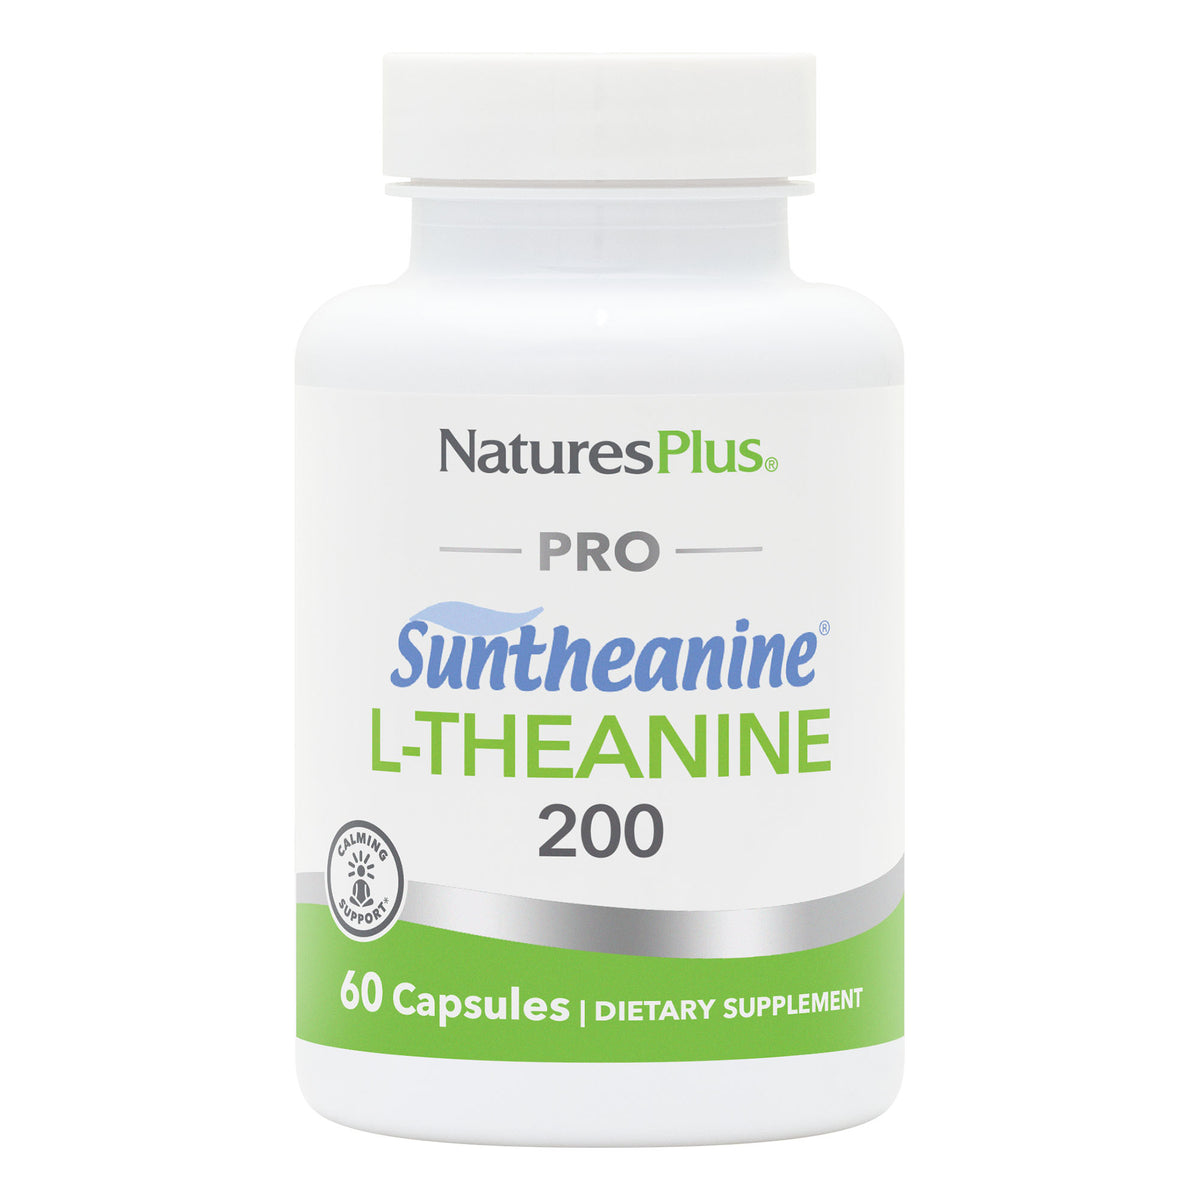 product image of NaturesPlus PRO Suntheanine® L-Theanine 200 containing 60 Count